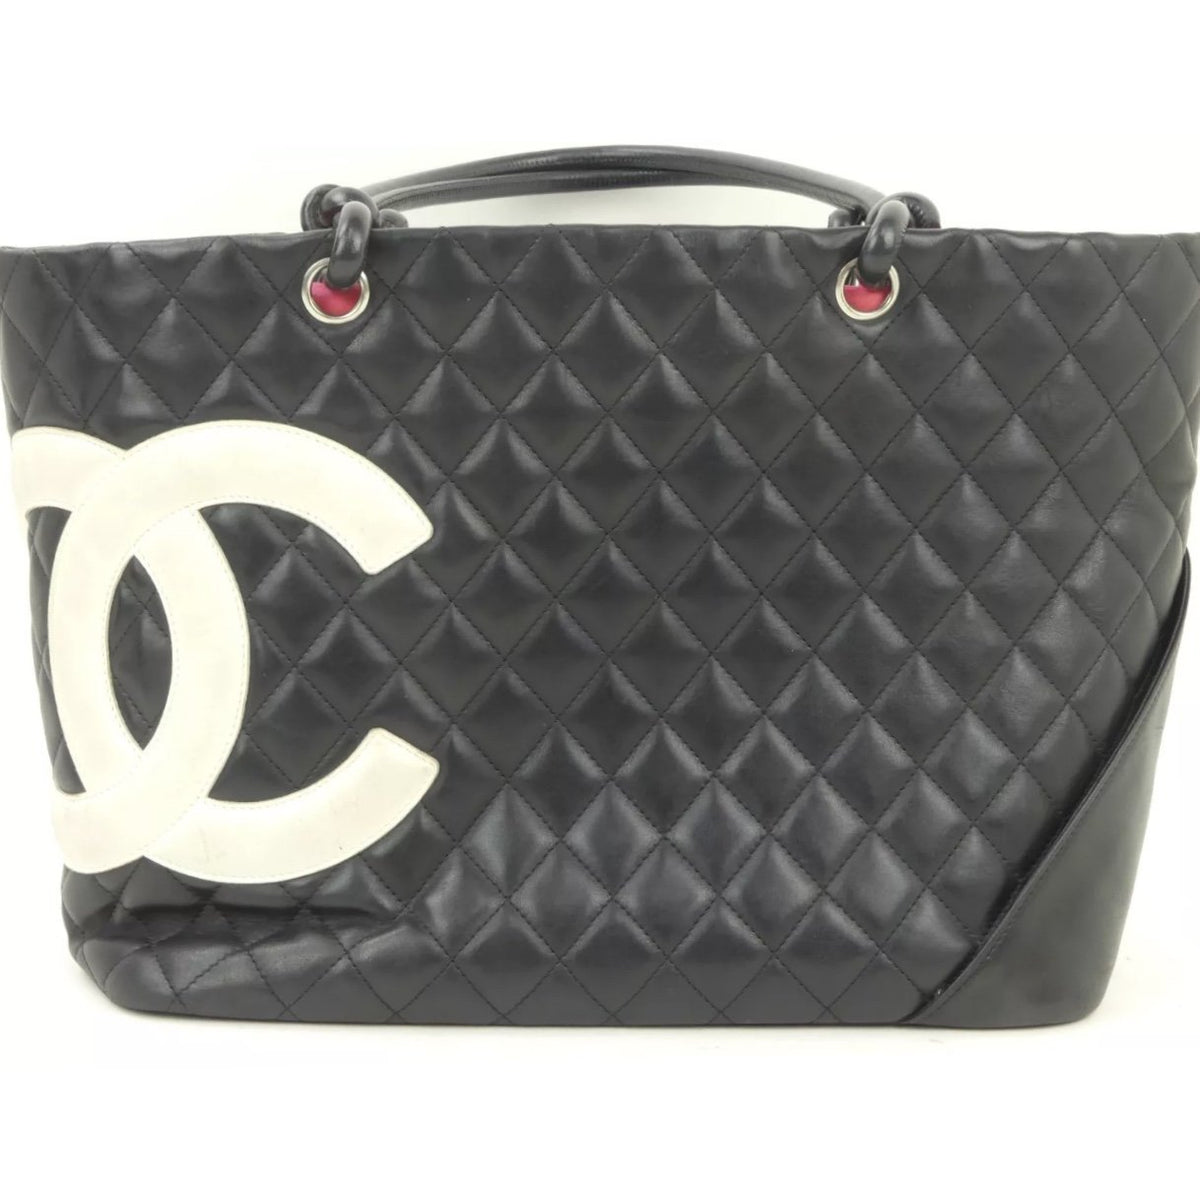 CHANEL Cambon Tote Black Bags & Handbags for Women for sale